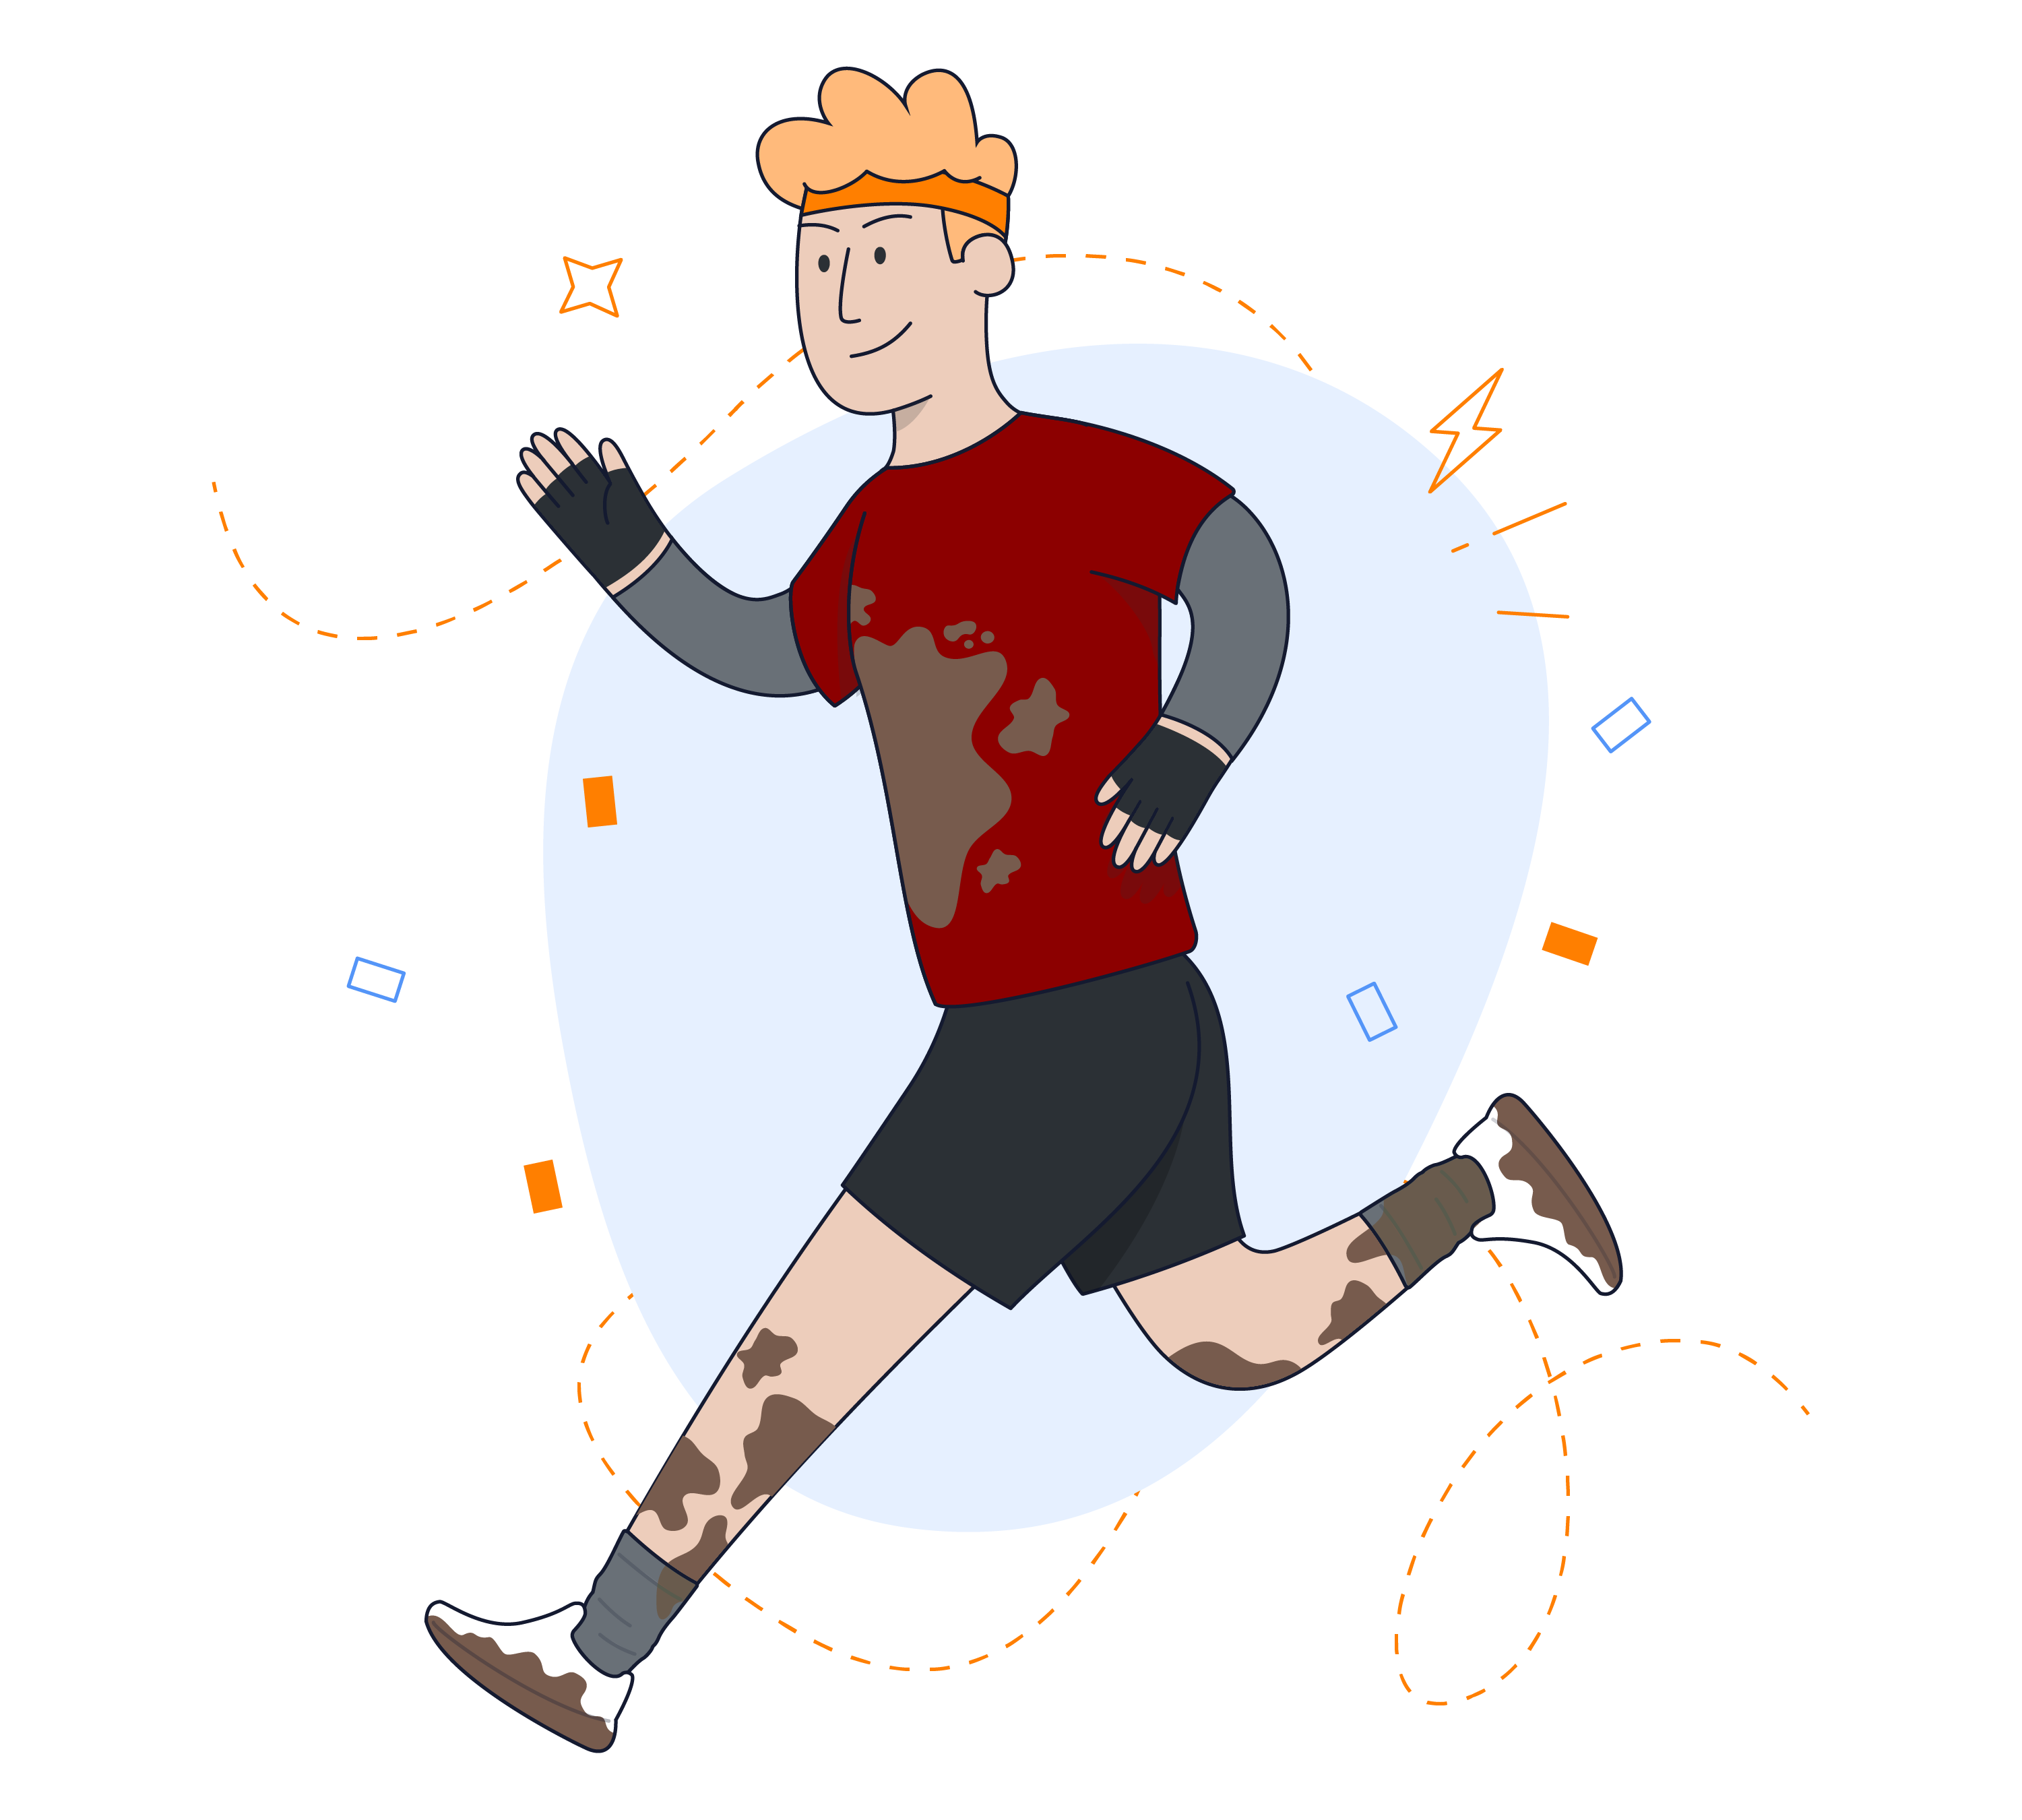 Illustration of a man running with muddy clothes